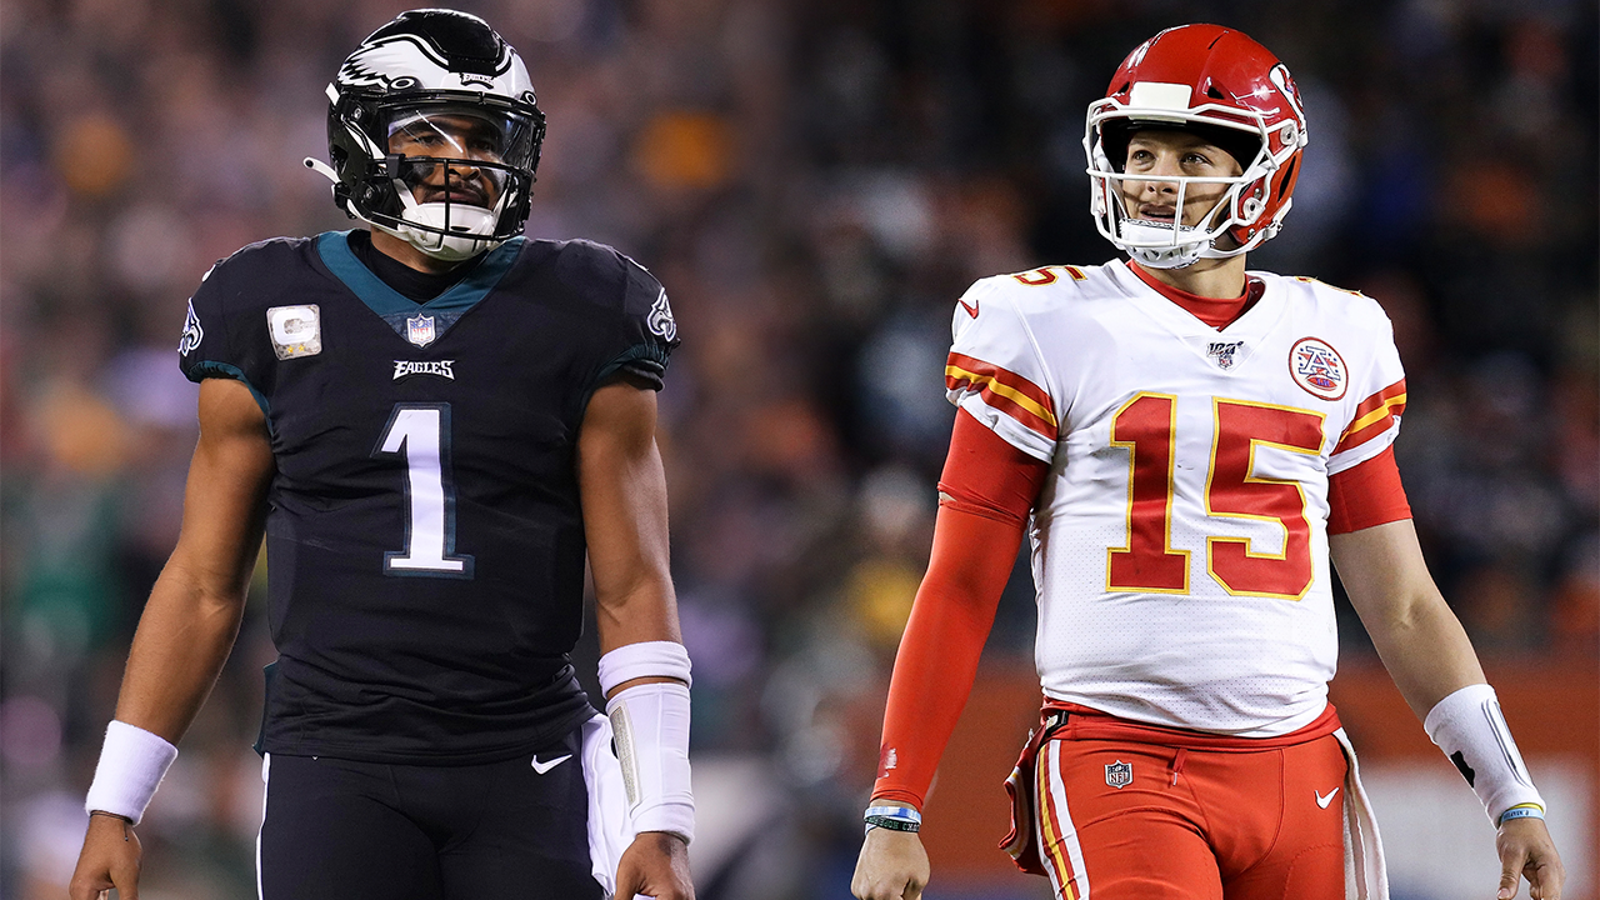 Beryl TV play-63444af38000ccb--hurts_mahomes_1675997935939 Super Bowl keys to victory: What Chiefs, Eagles must do to win Sports 